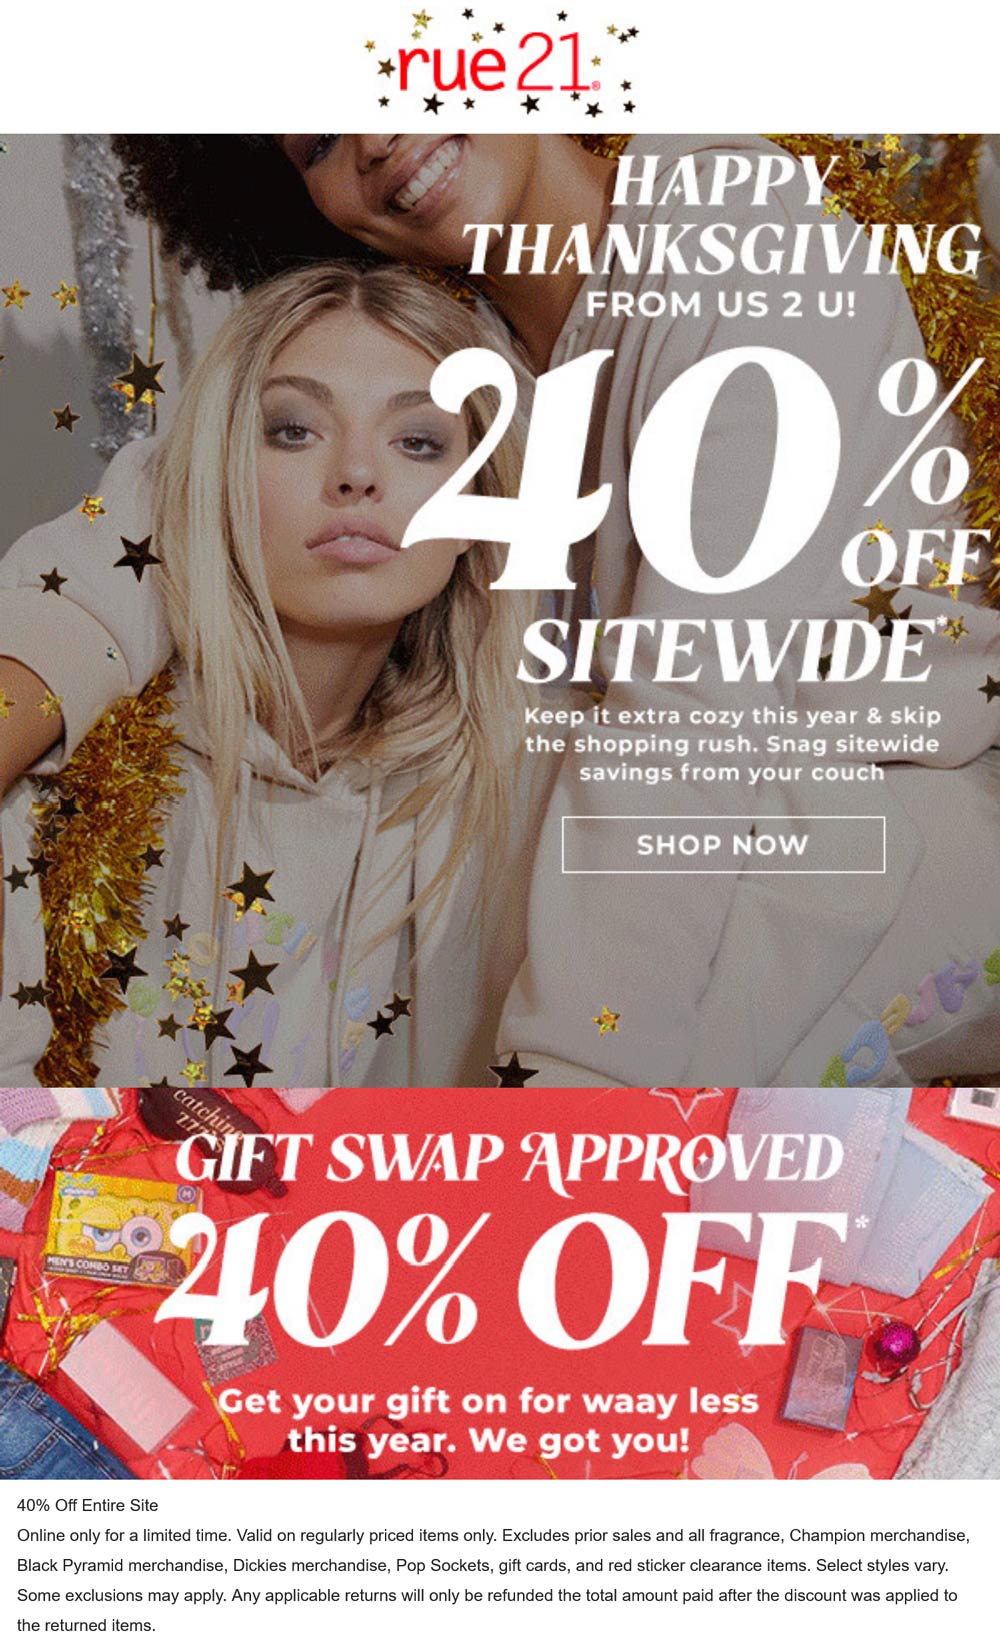 rue21 stores Coupon  40% off everything online at rue21 #rue21 